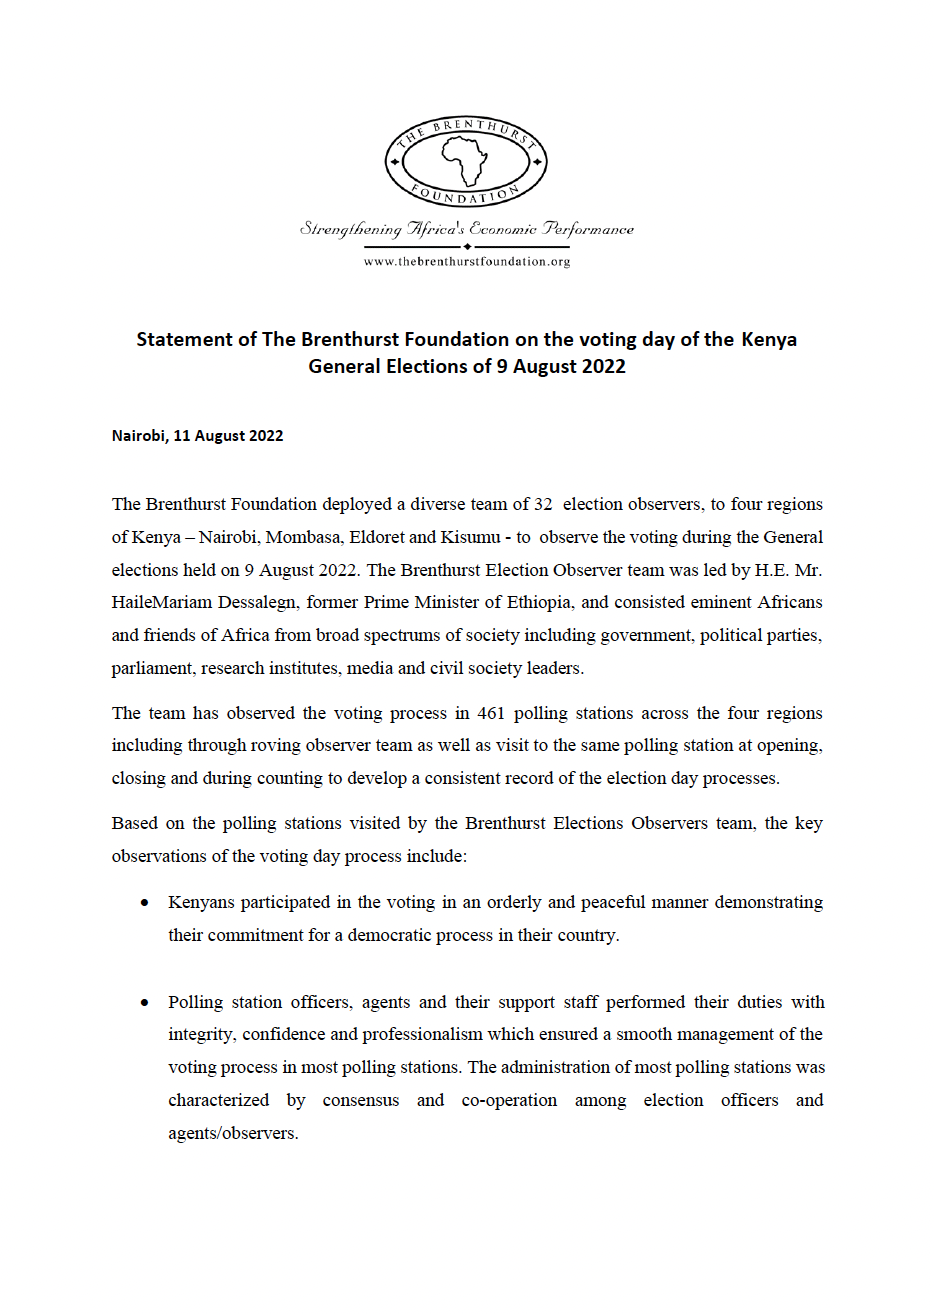 Statement of The Brenthurst Foundation on the Voting Day of the Kenya General Elections of 9 August 2022